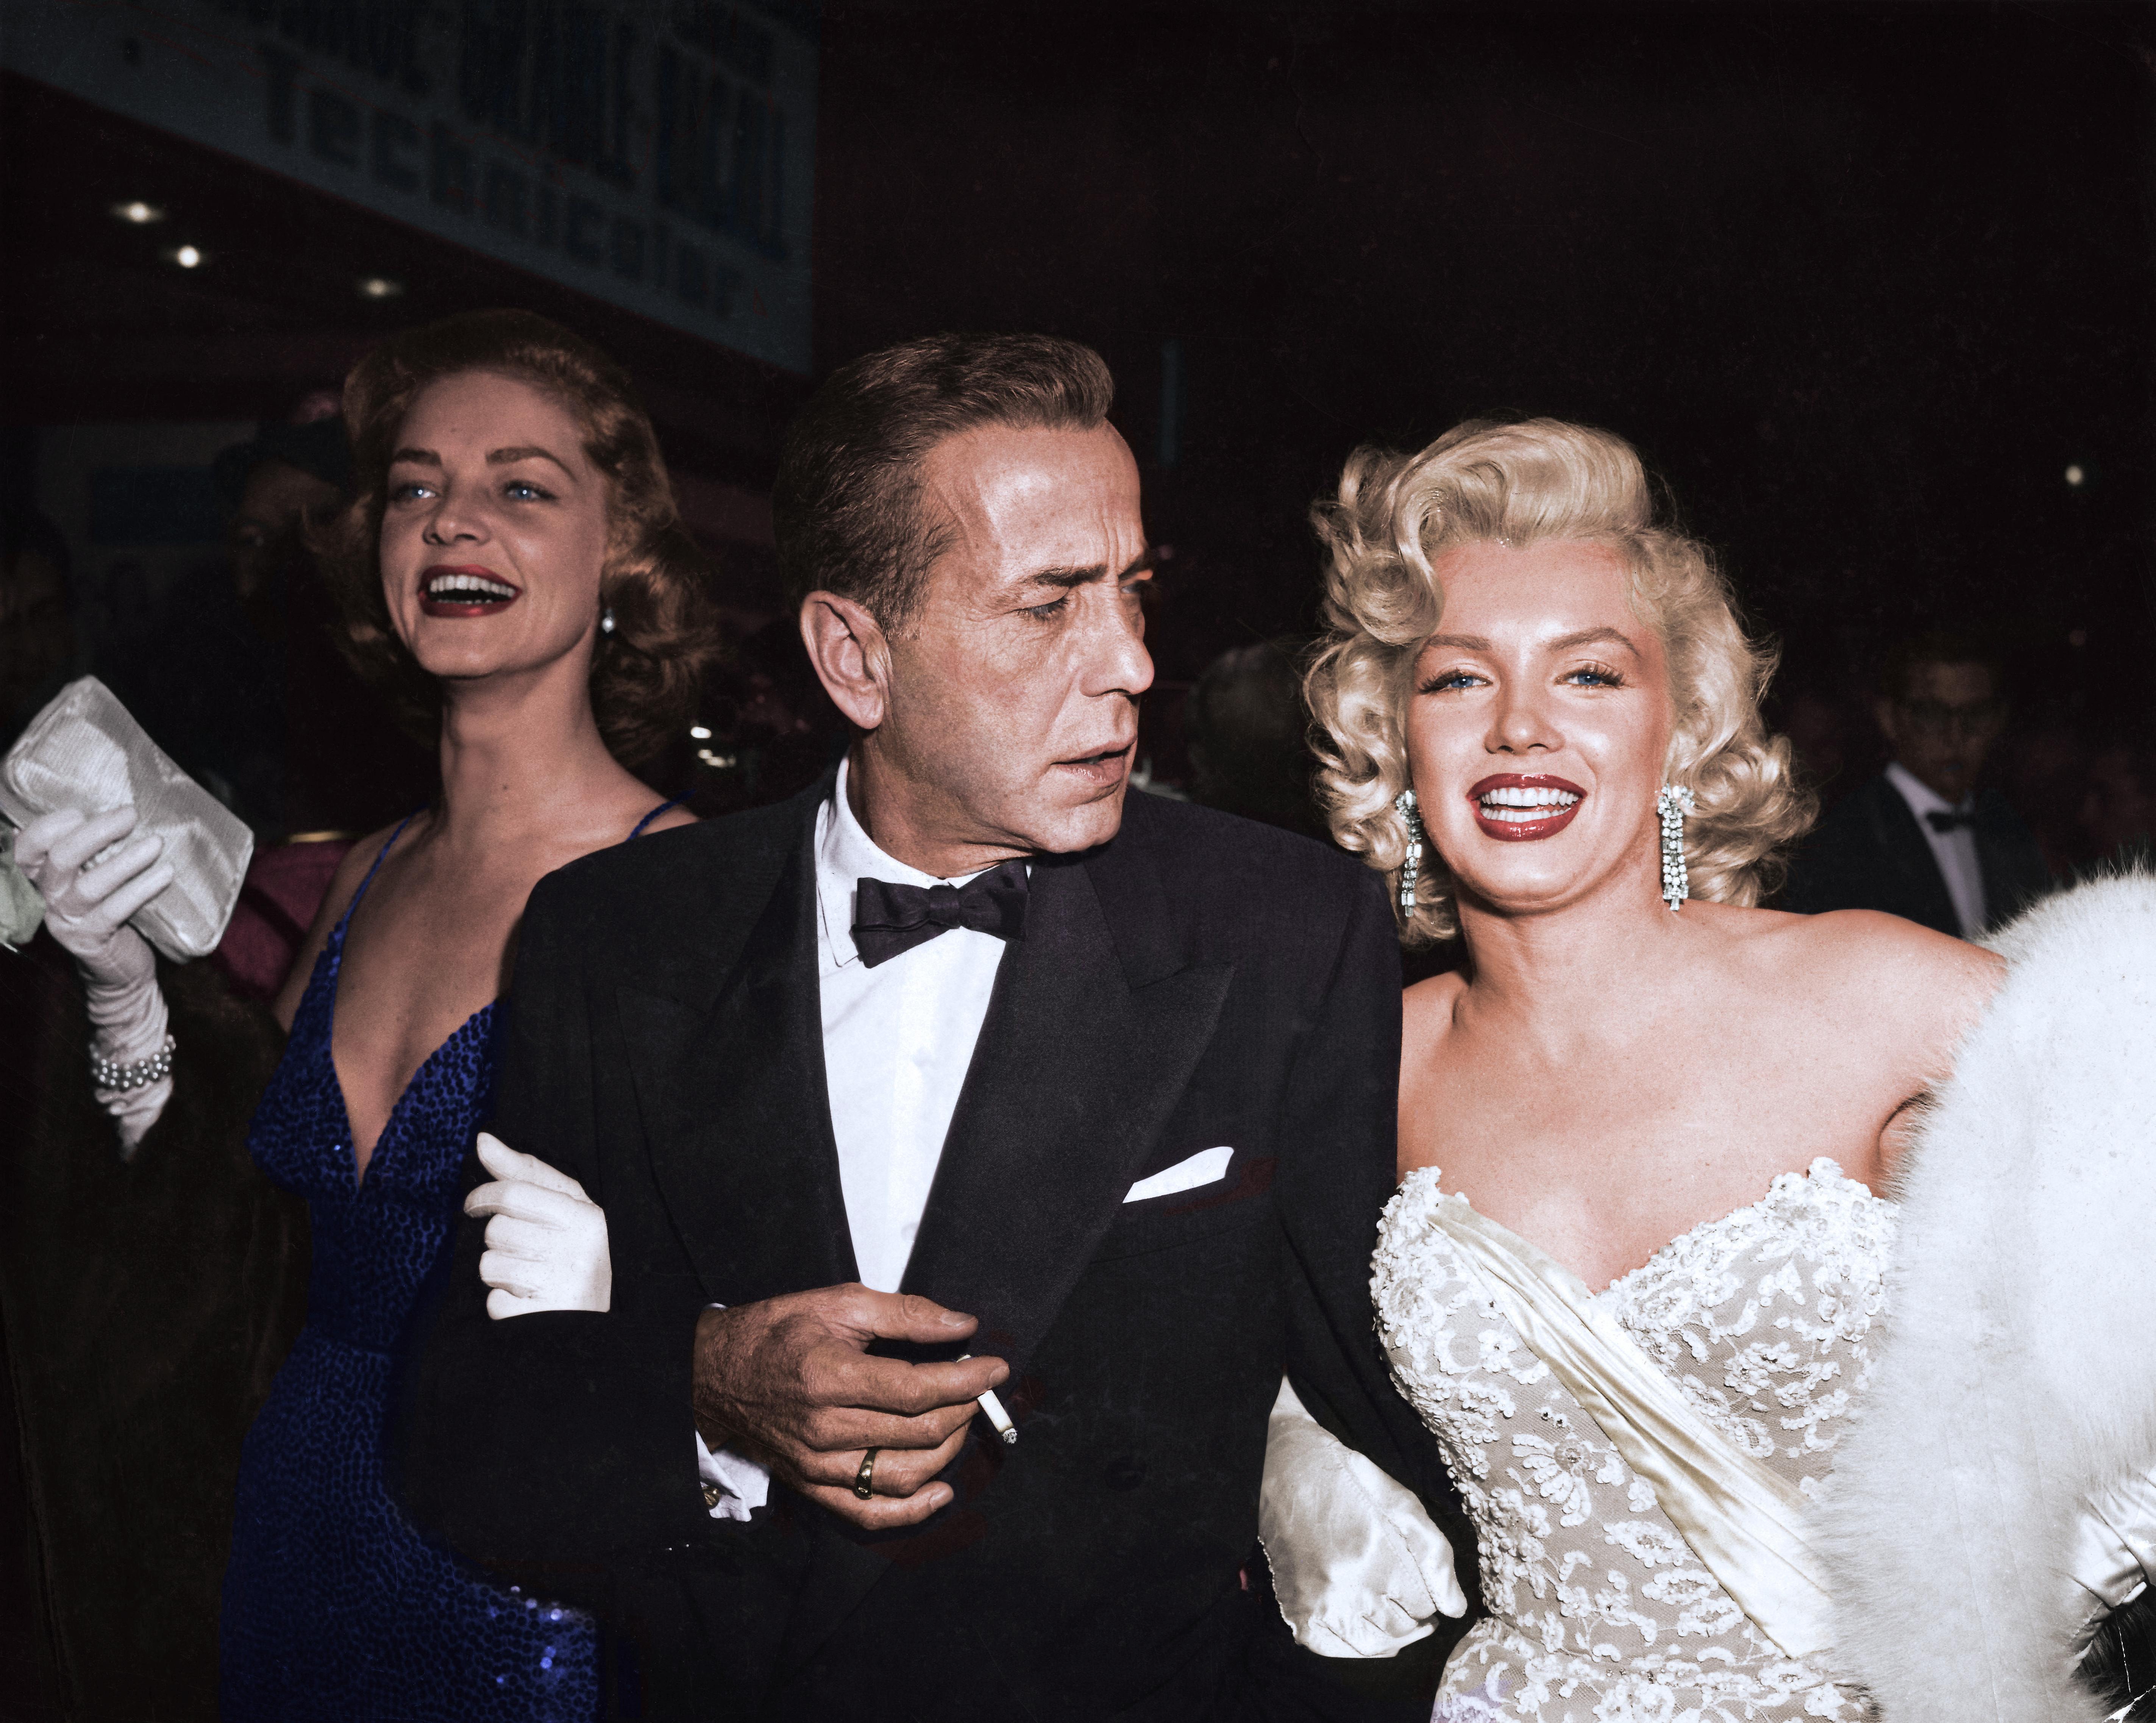 Frank Worth Portrait Photograph - Marilyn Monroe, Humphrey Bogart and Lauren Bacall at a Party